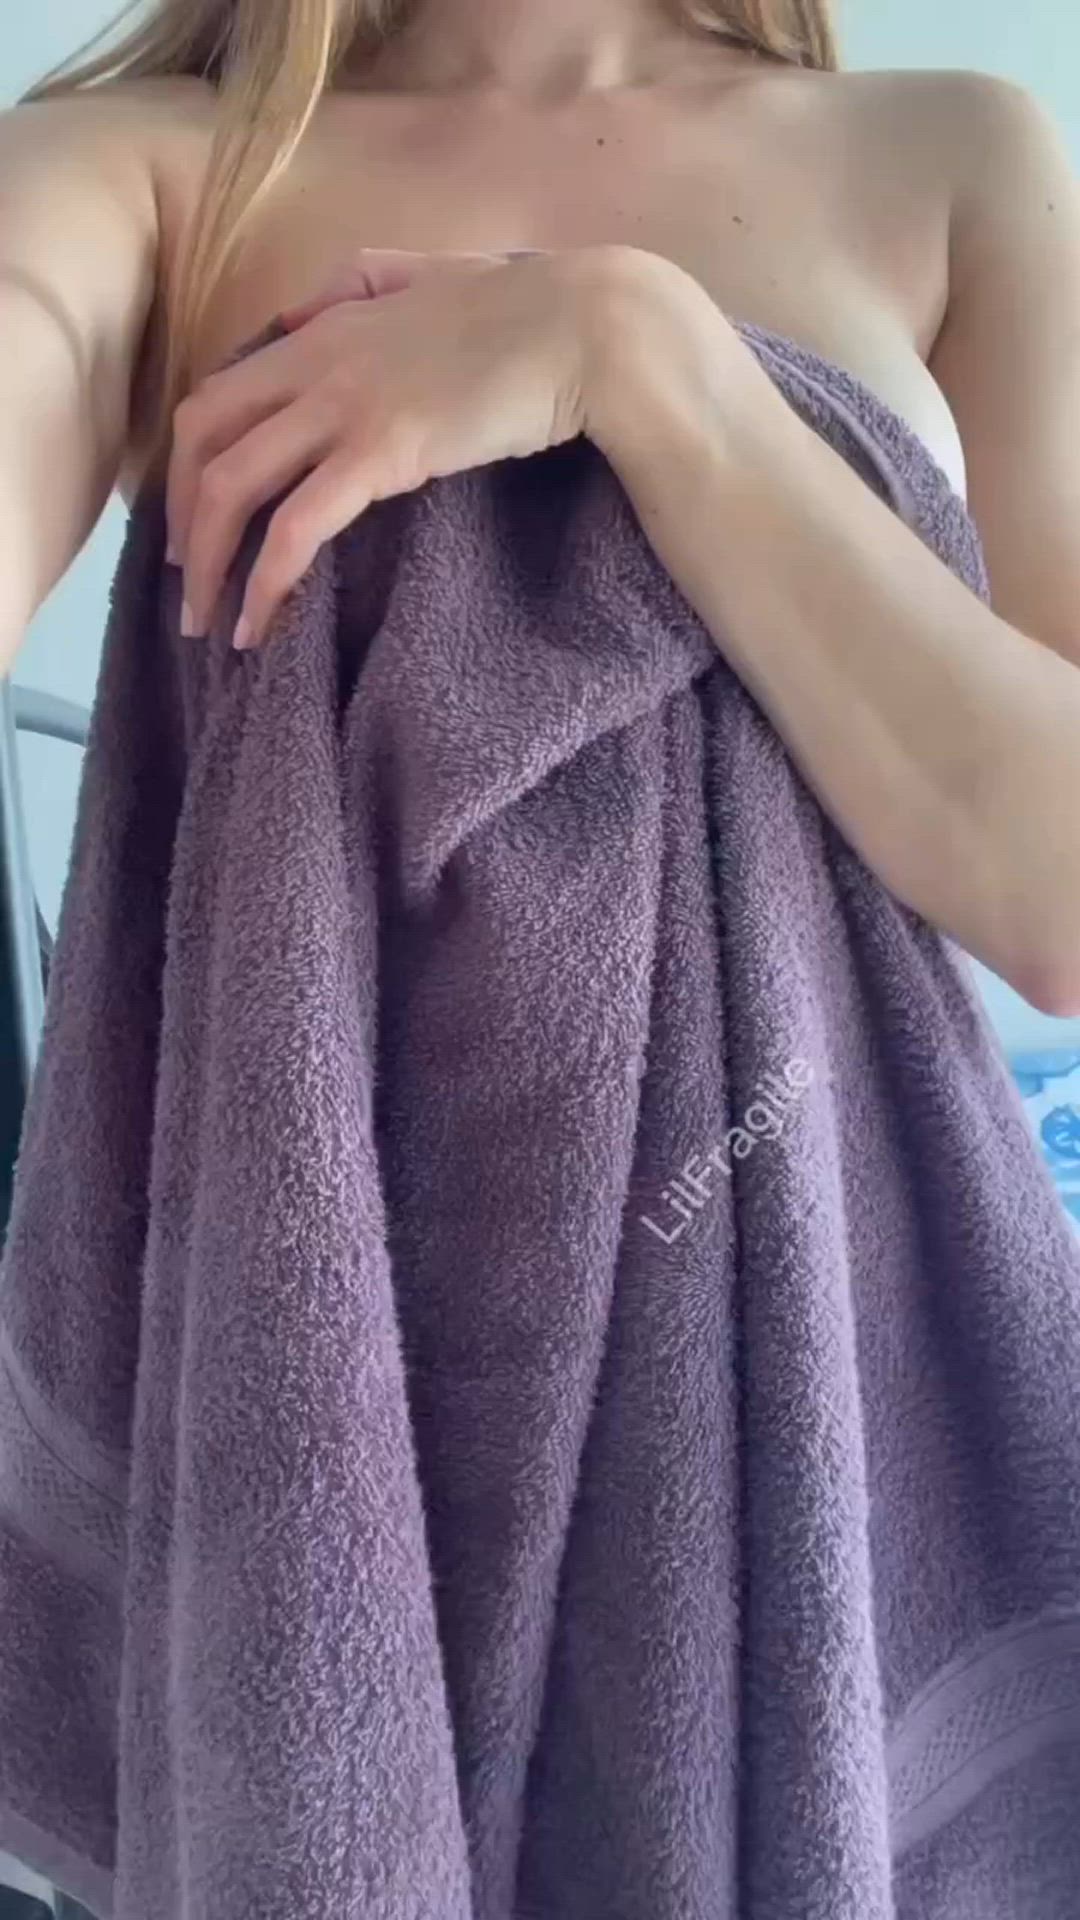 Towel porn video with onlyfans model LilFragile <strong>@lilfragile</strong>